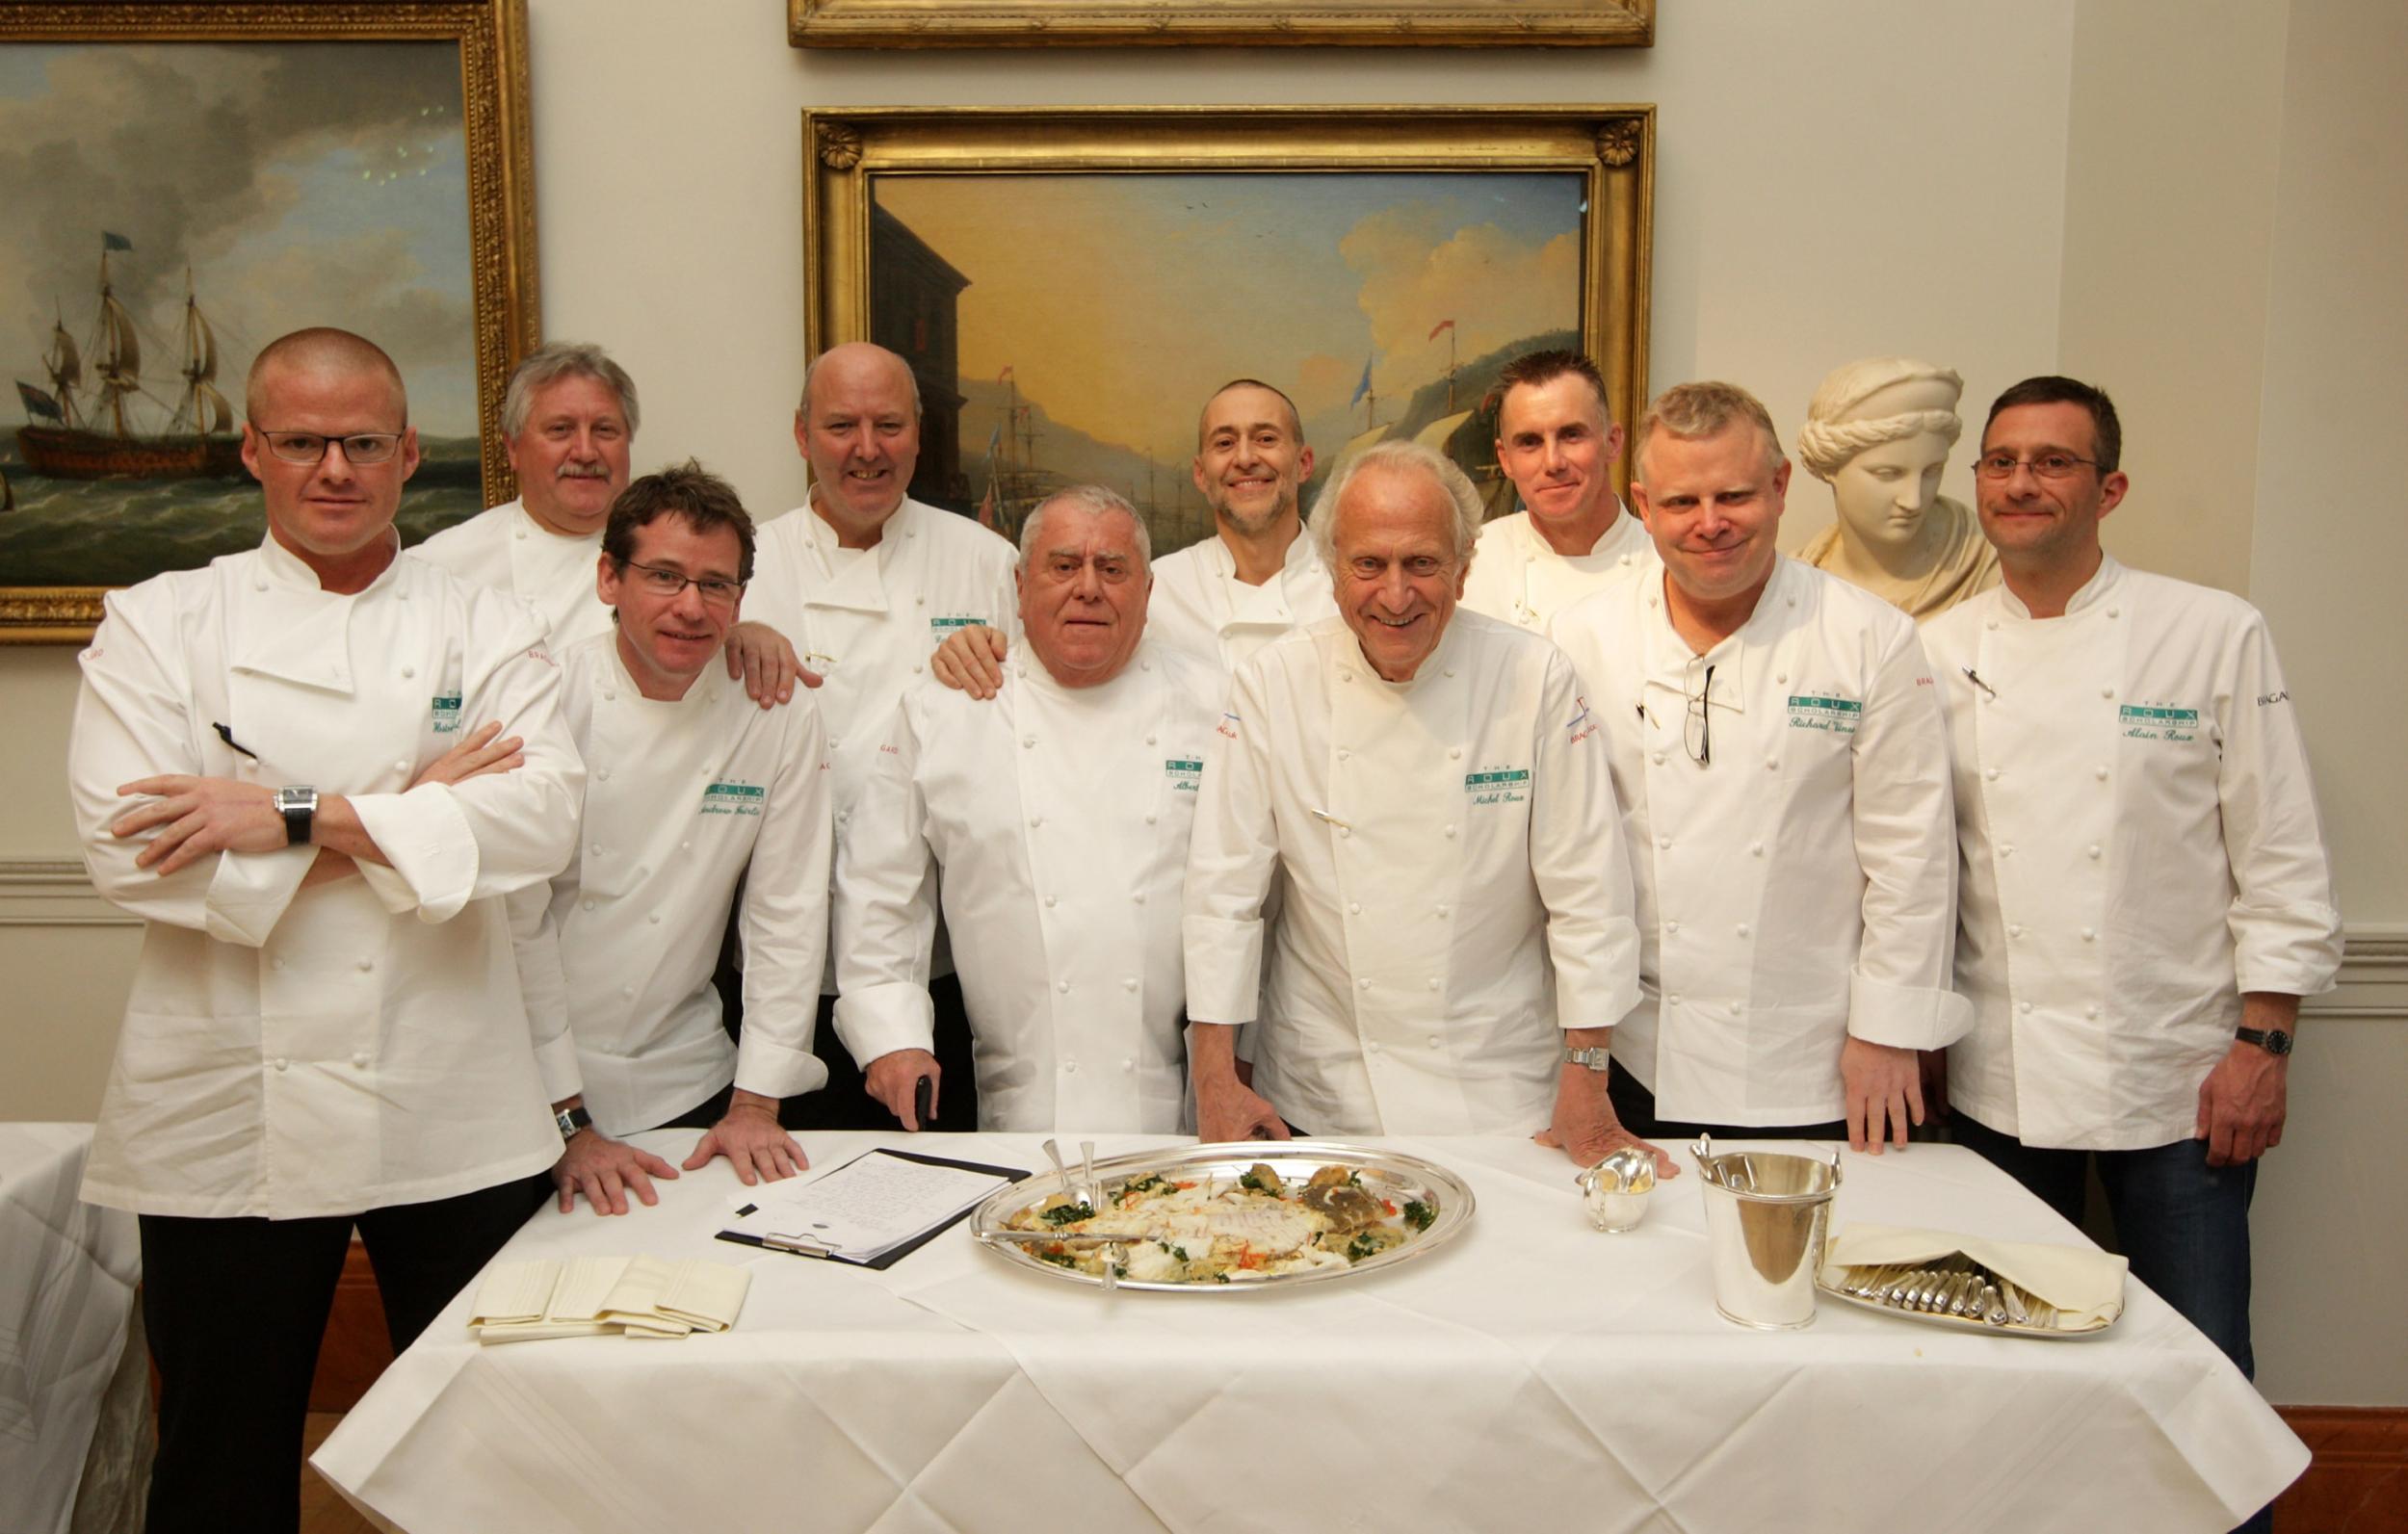 Fairlie (third left) and fellow culinary superstars were tasked with judging the 2006 competition to win a Roux scholarship’